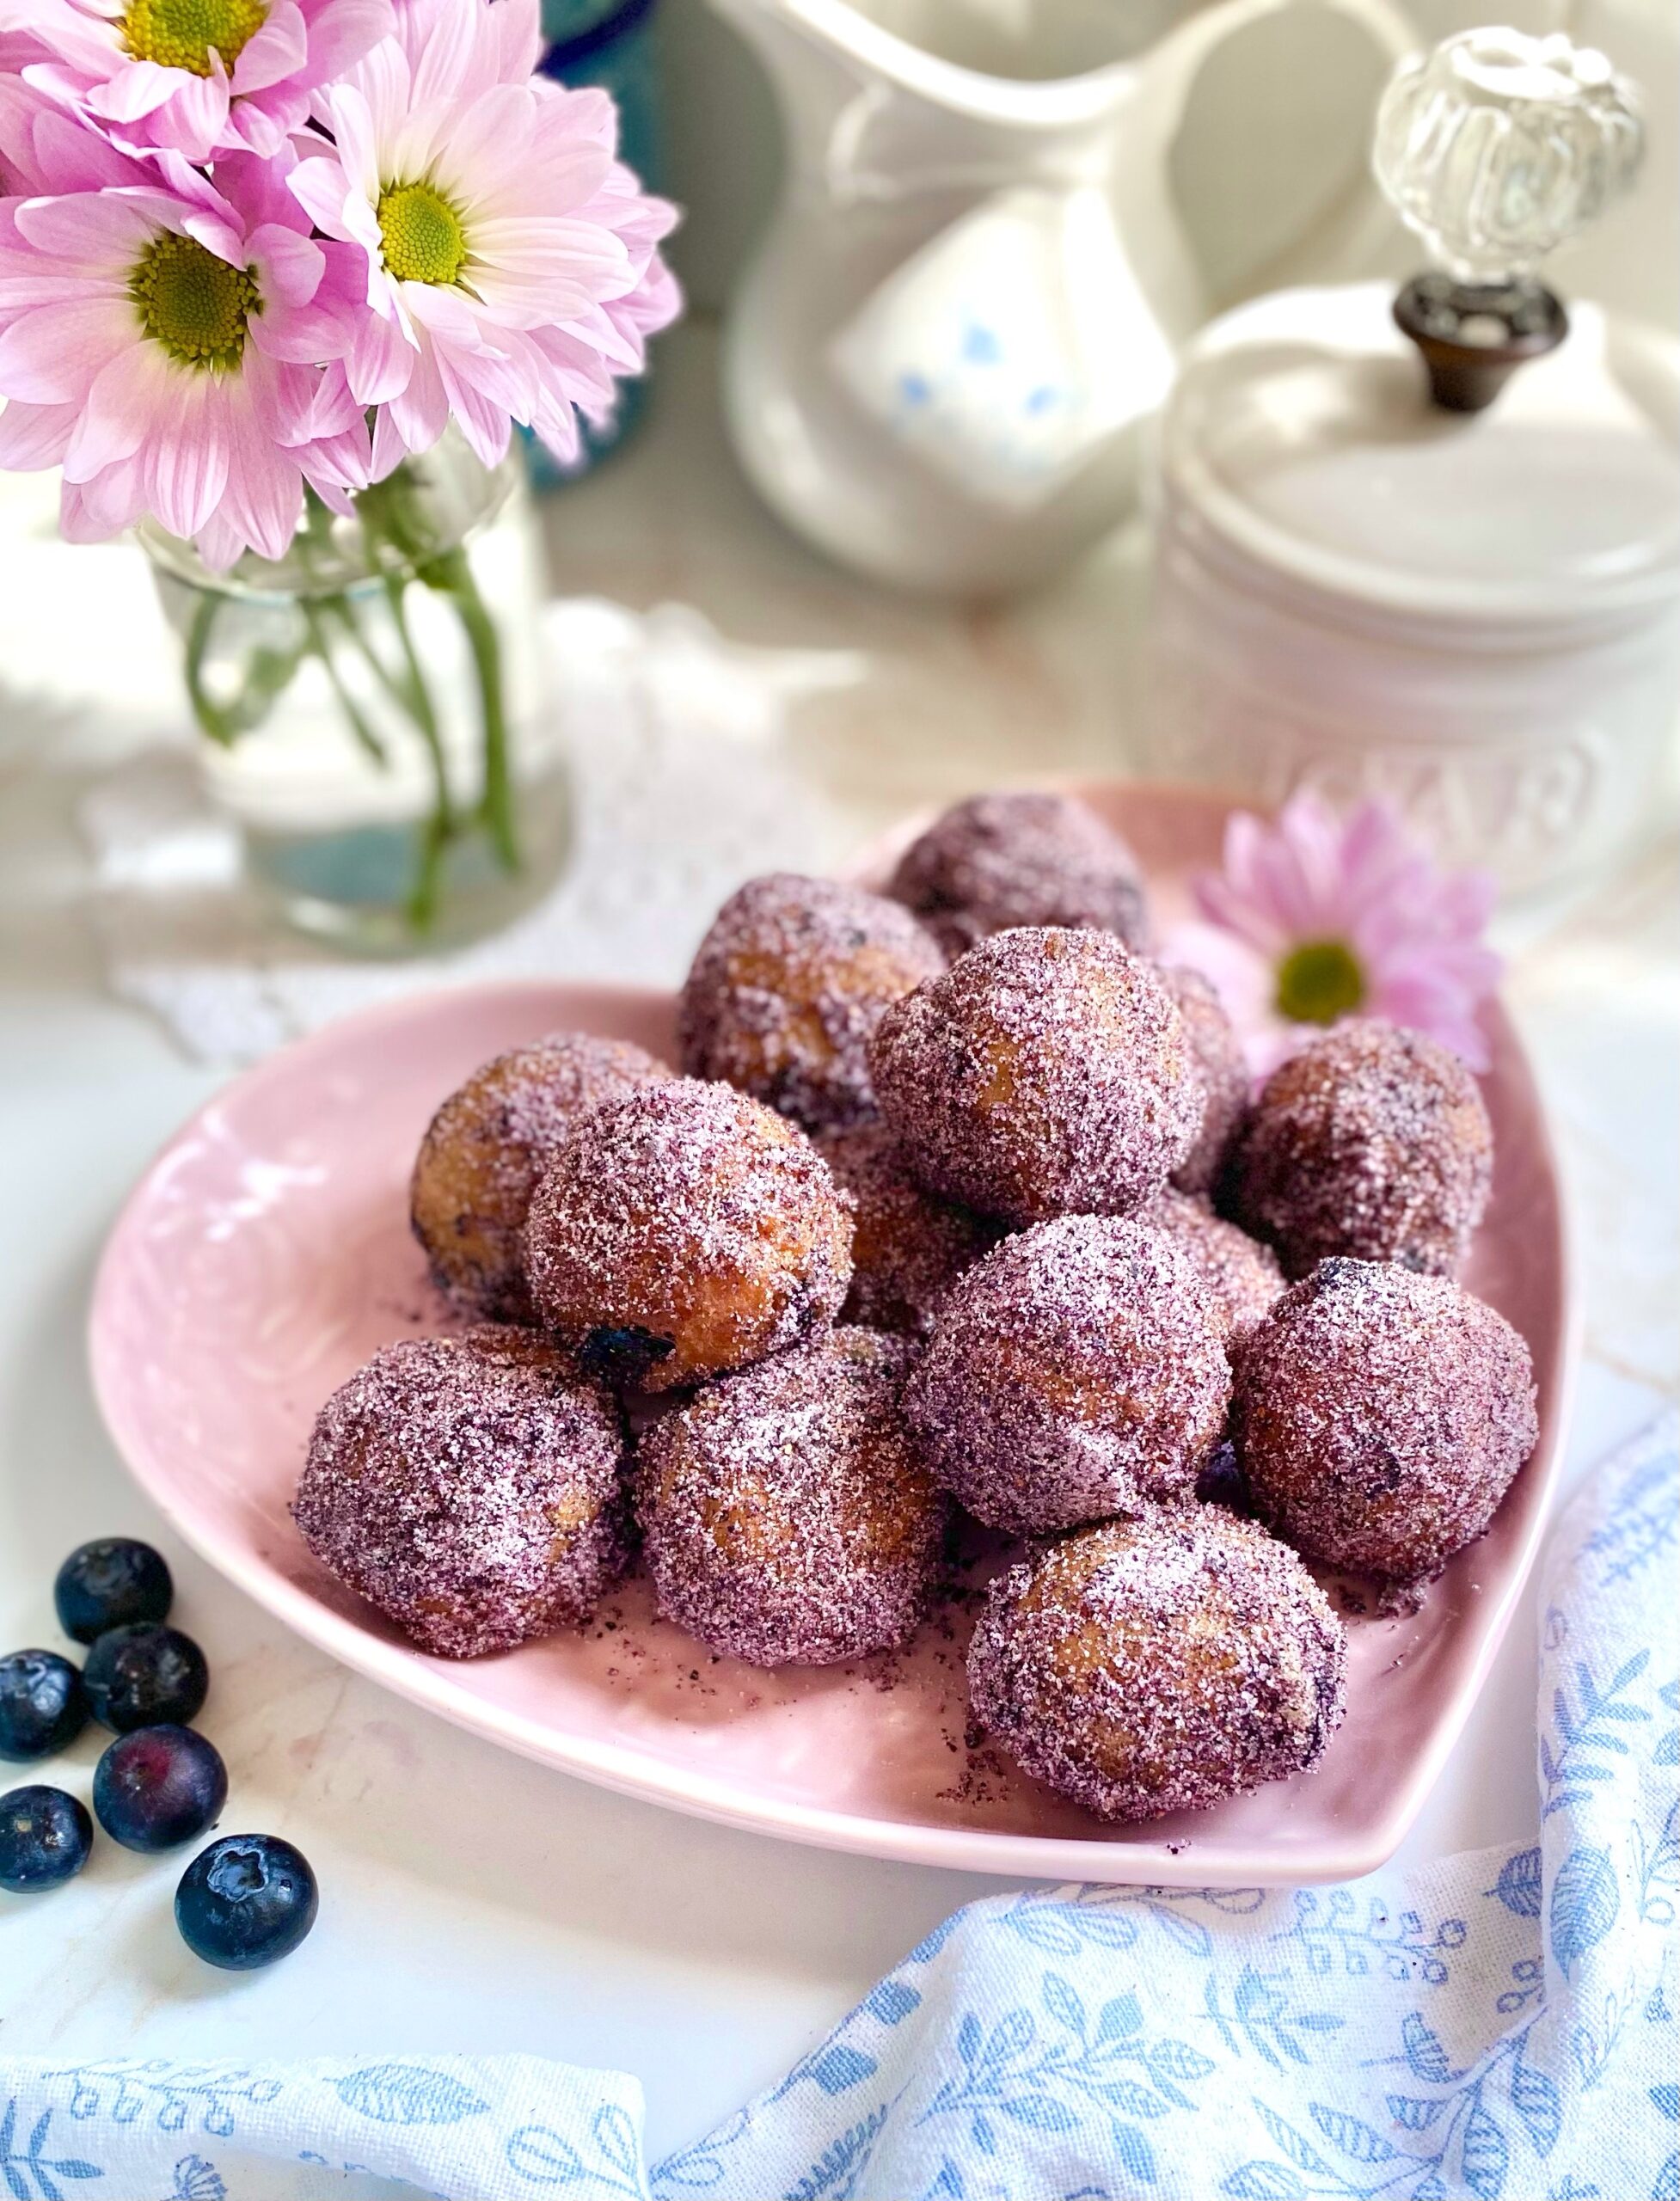 Blueberry Donut Holes with Homemade Blueberry Sugar